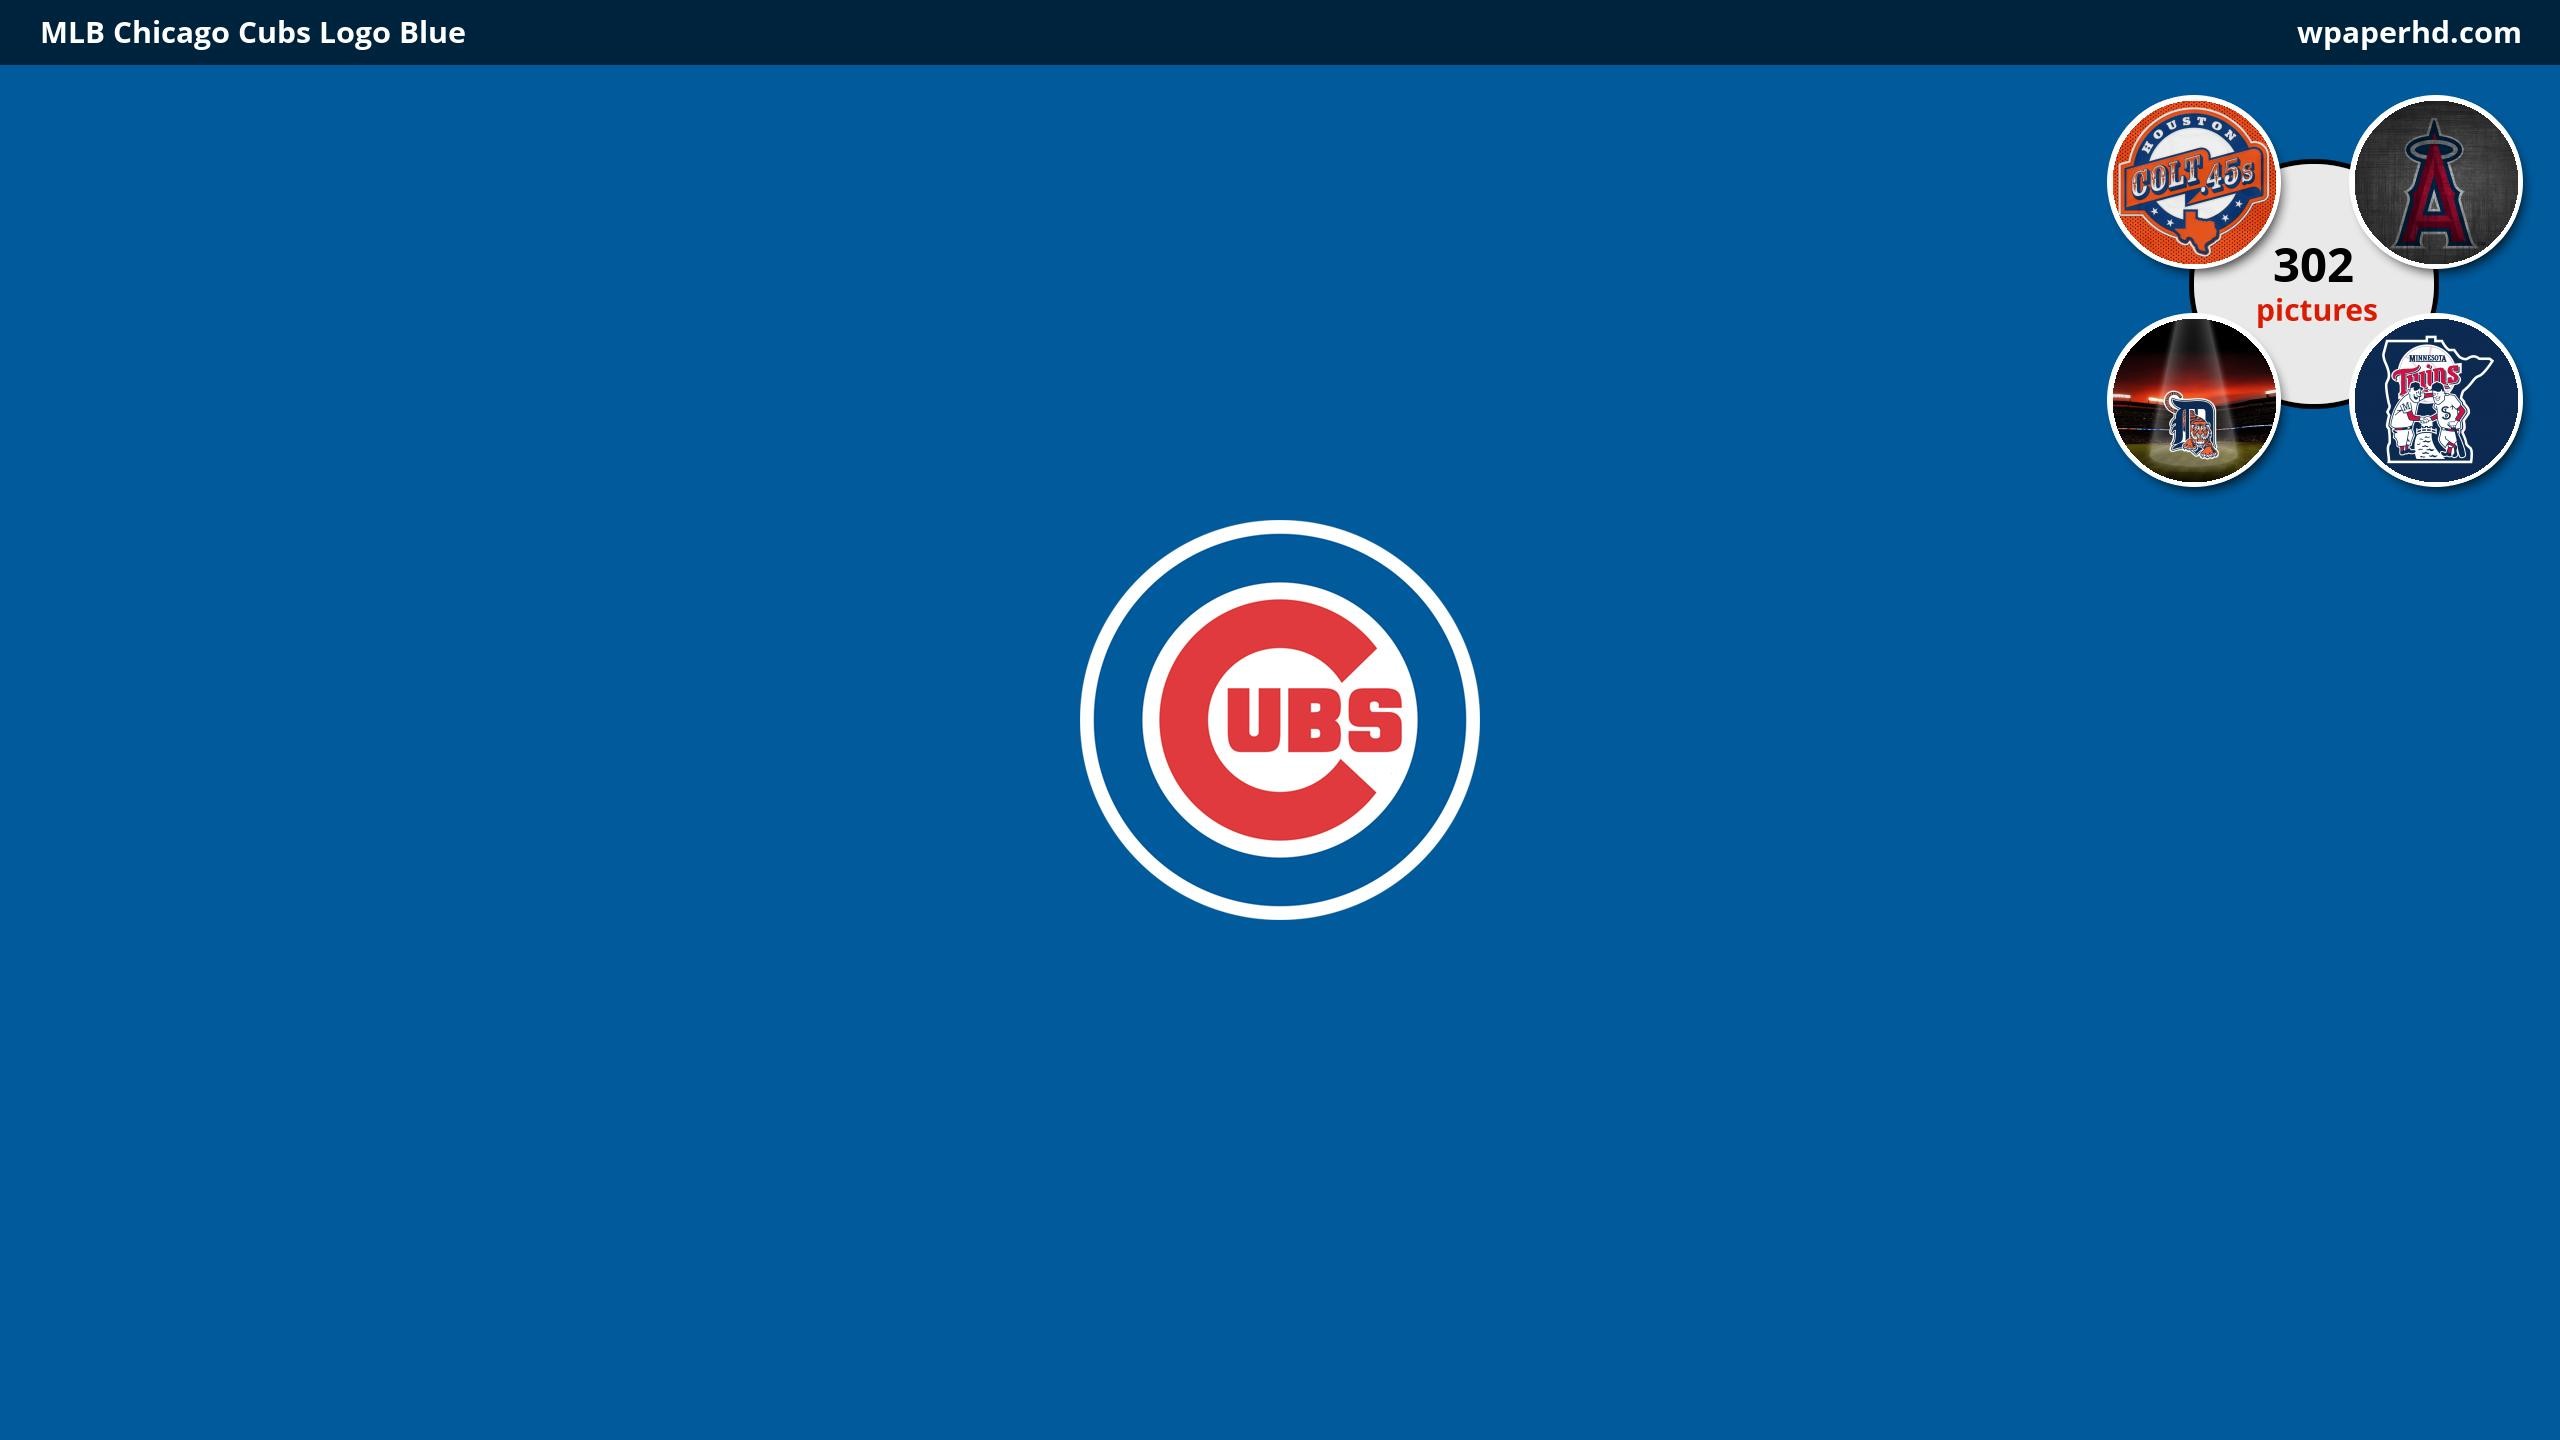 2560x1440 Free Download Chicago Cubs Logos Wallpapers, .UQ191